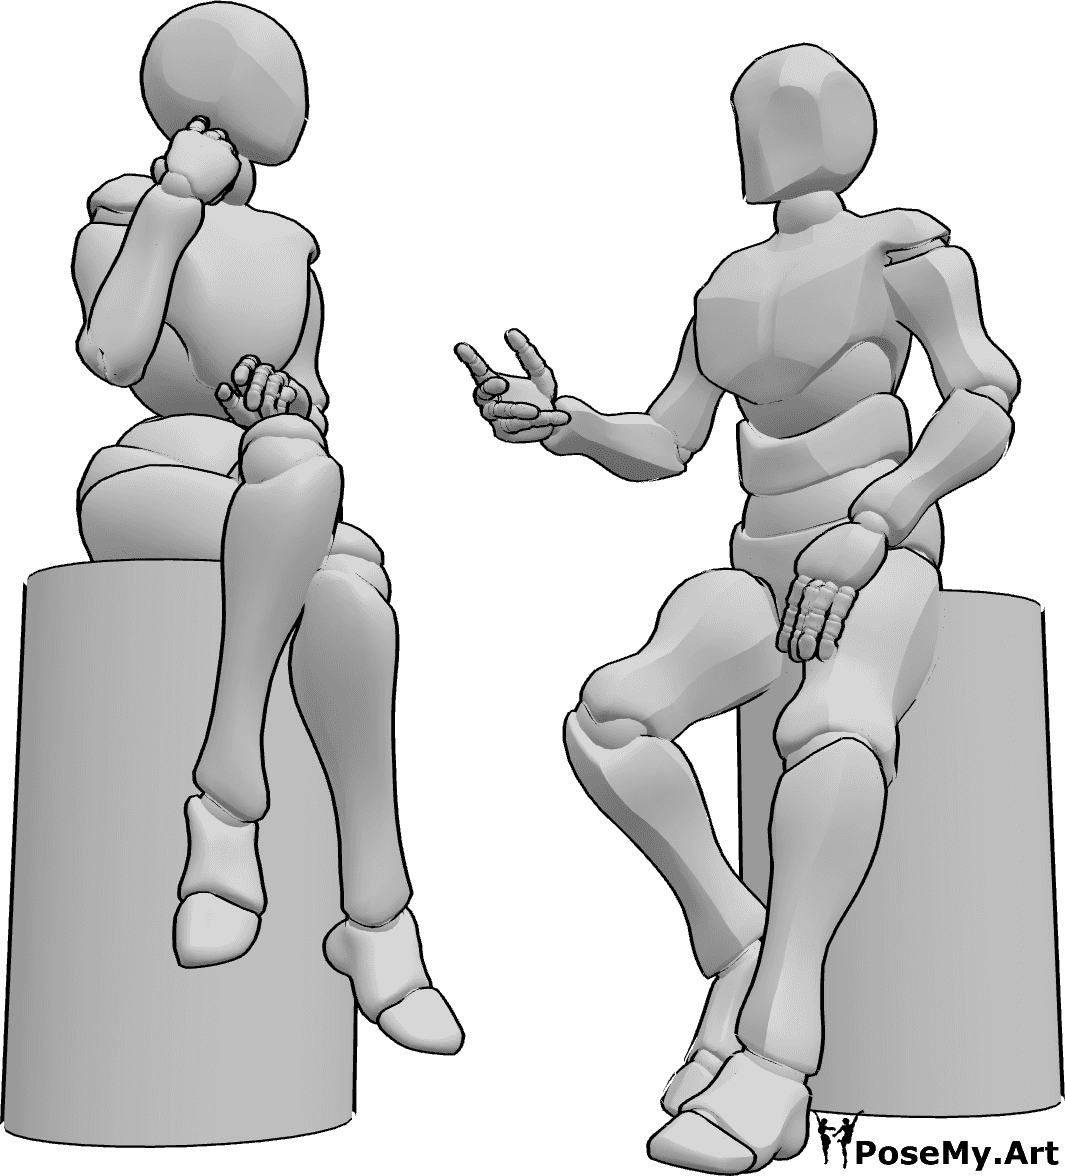 Pose Reference- Sitting talking flirting pose - Female and male are sitting on chairs and talking, flirting